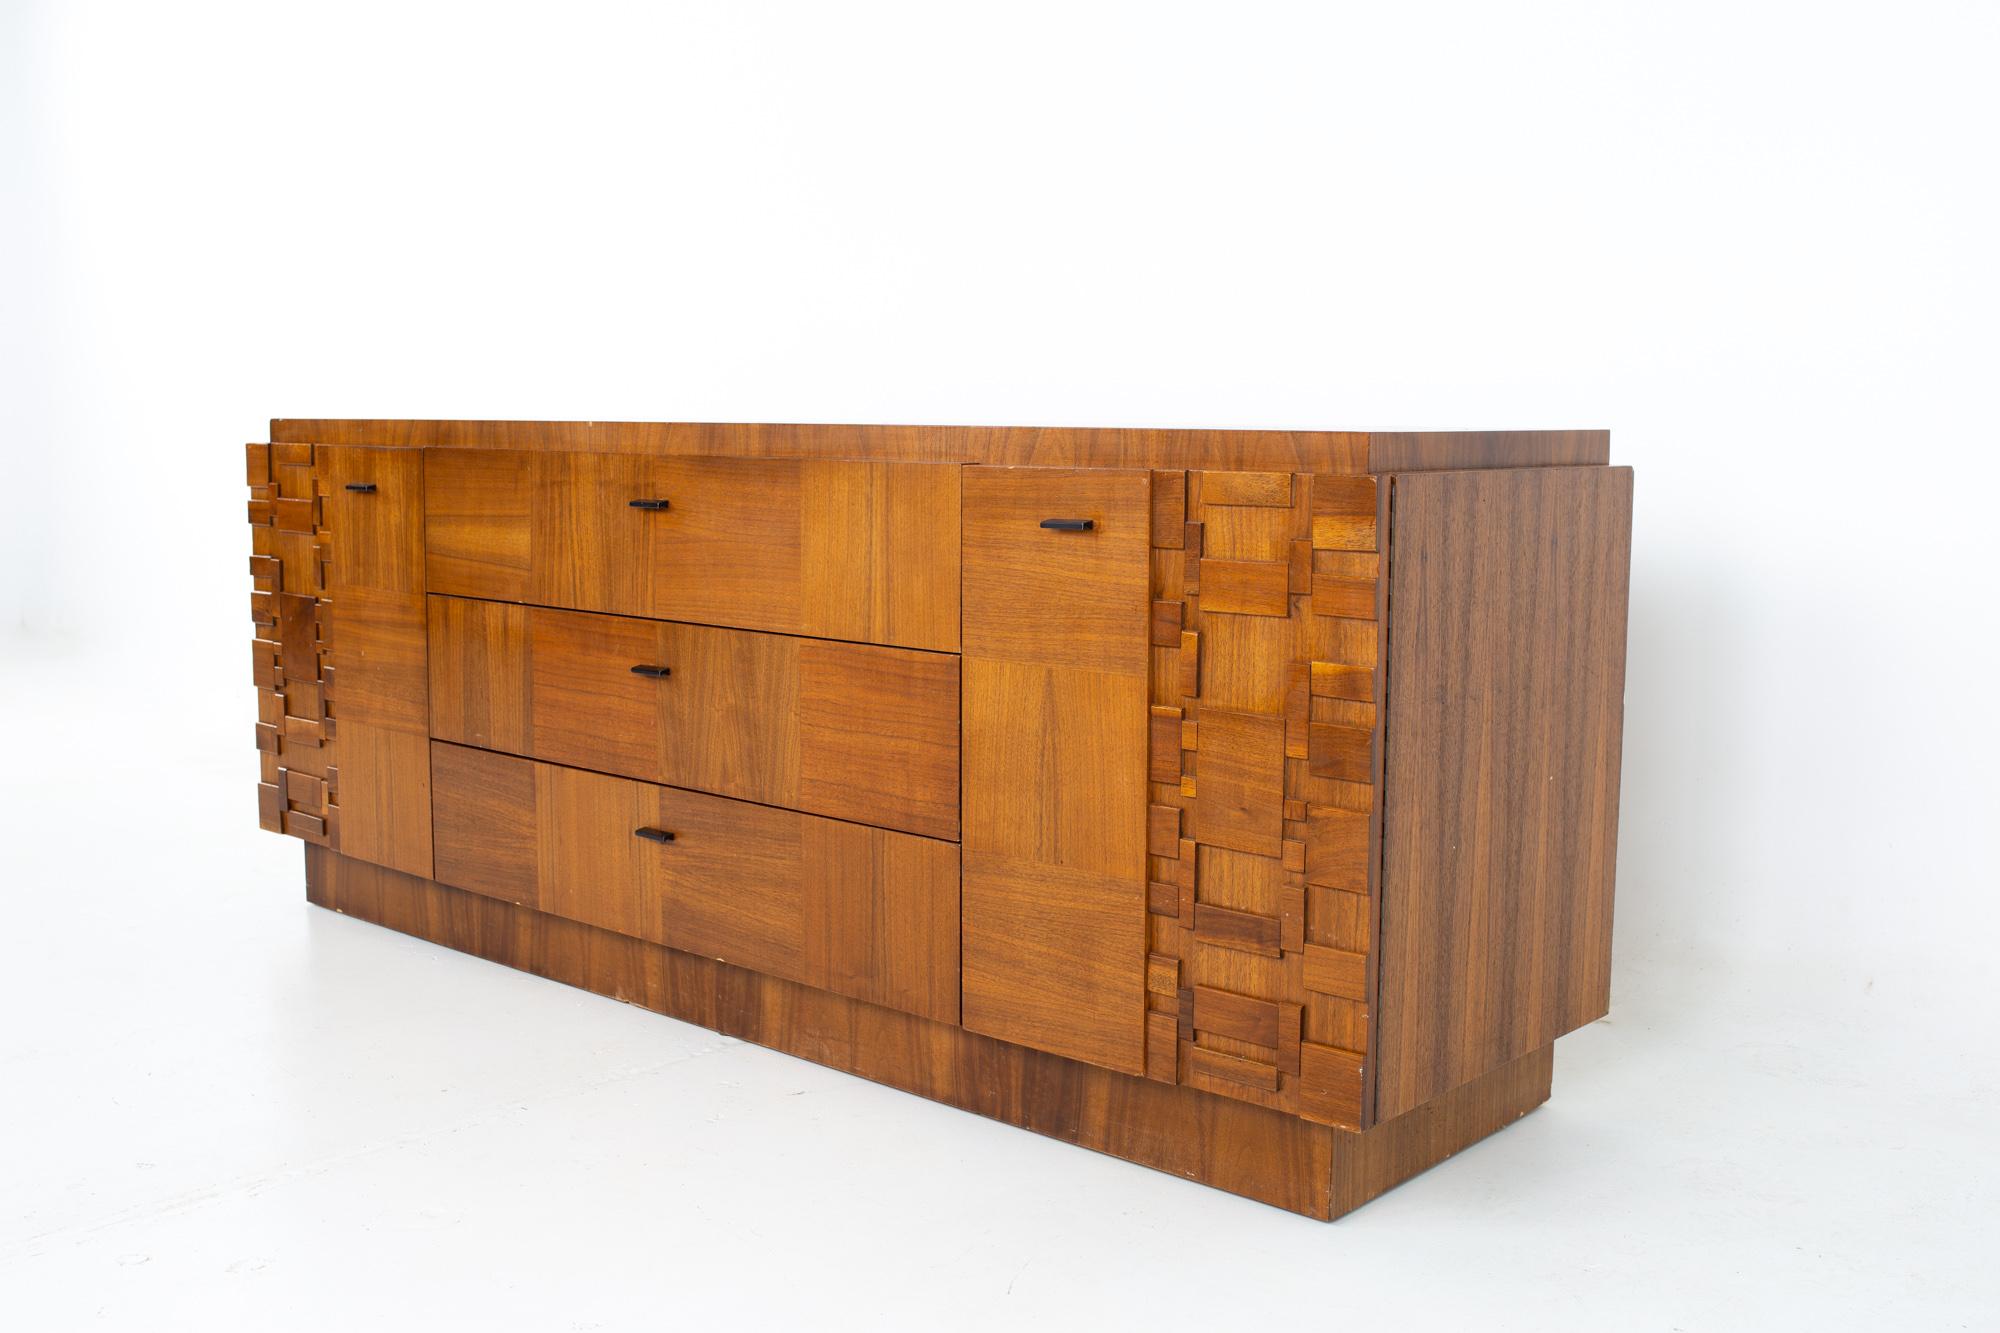 Paul Evans style Lane Brutalist midcentury walnut 9 drawer lowboy dresser
Dresser measures: 79.75 wide x 20.5 deep x 30 inches high

All pieces of furniture can be had in what we call restored vintage condition. That means the piece is restored